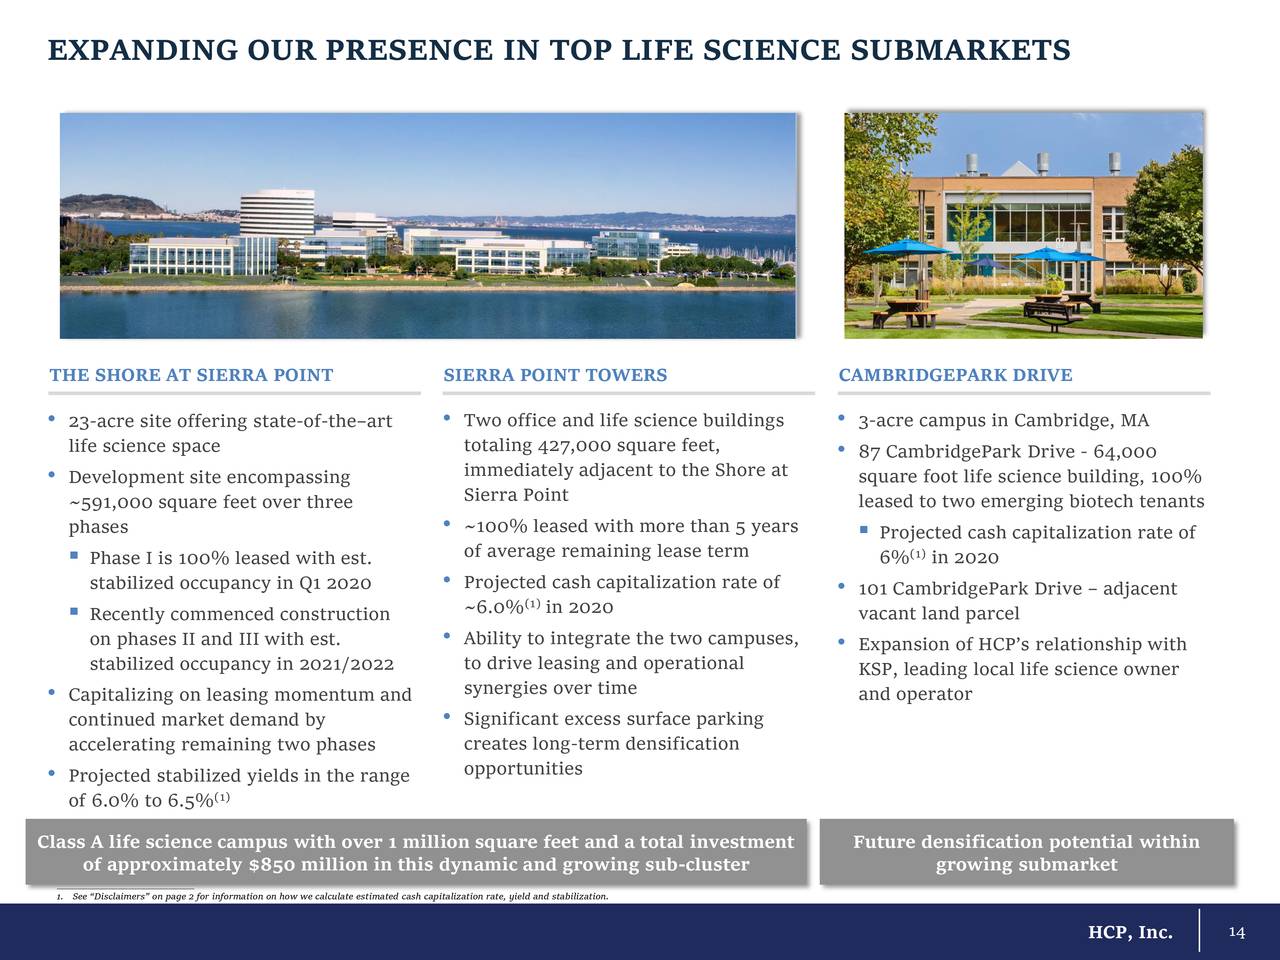 EXPANDING OUR PRESENCE IN TOP LIFE SCIENCE SUBMARKETS